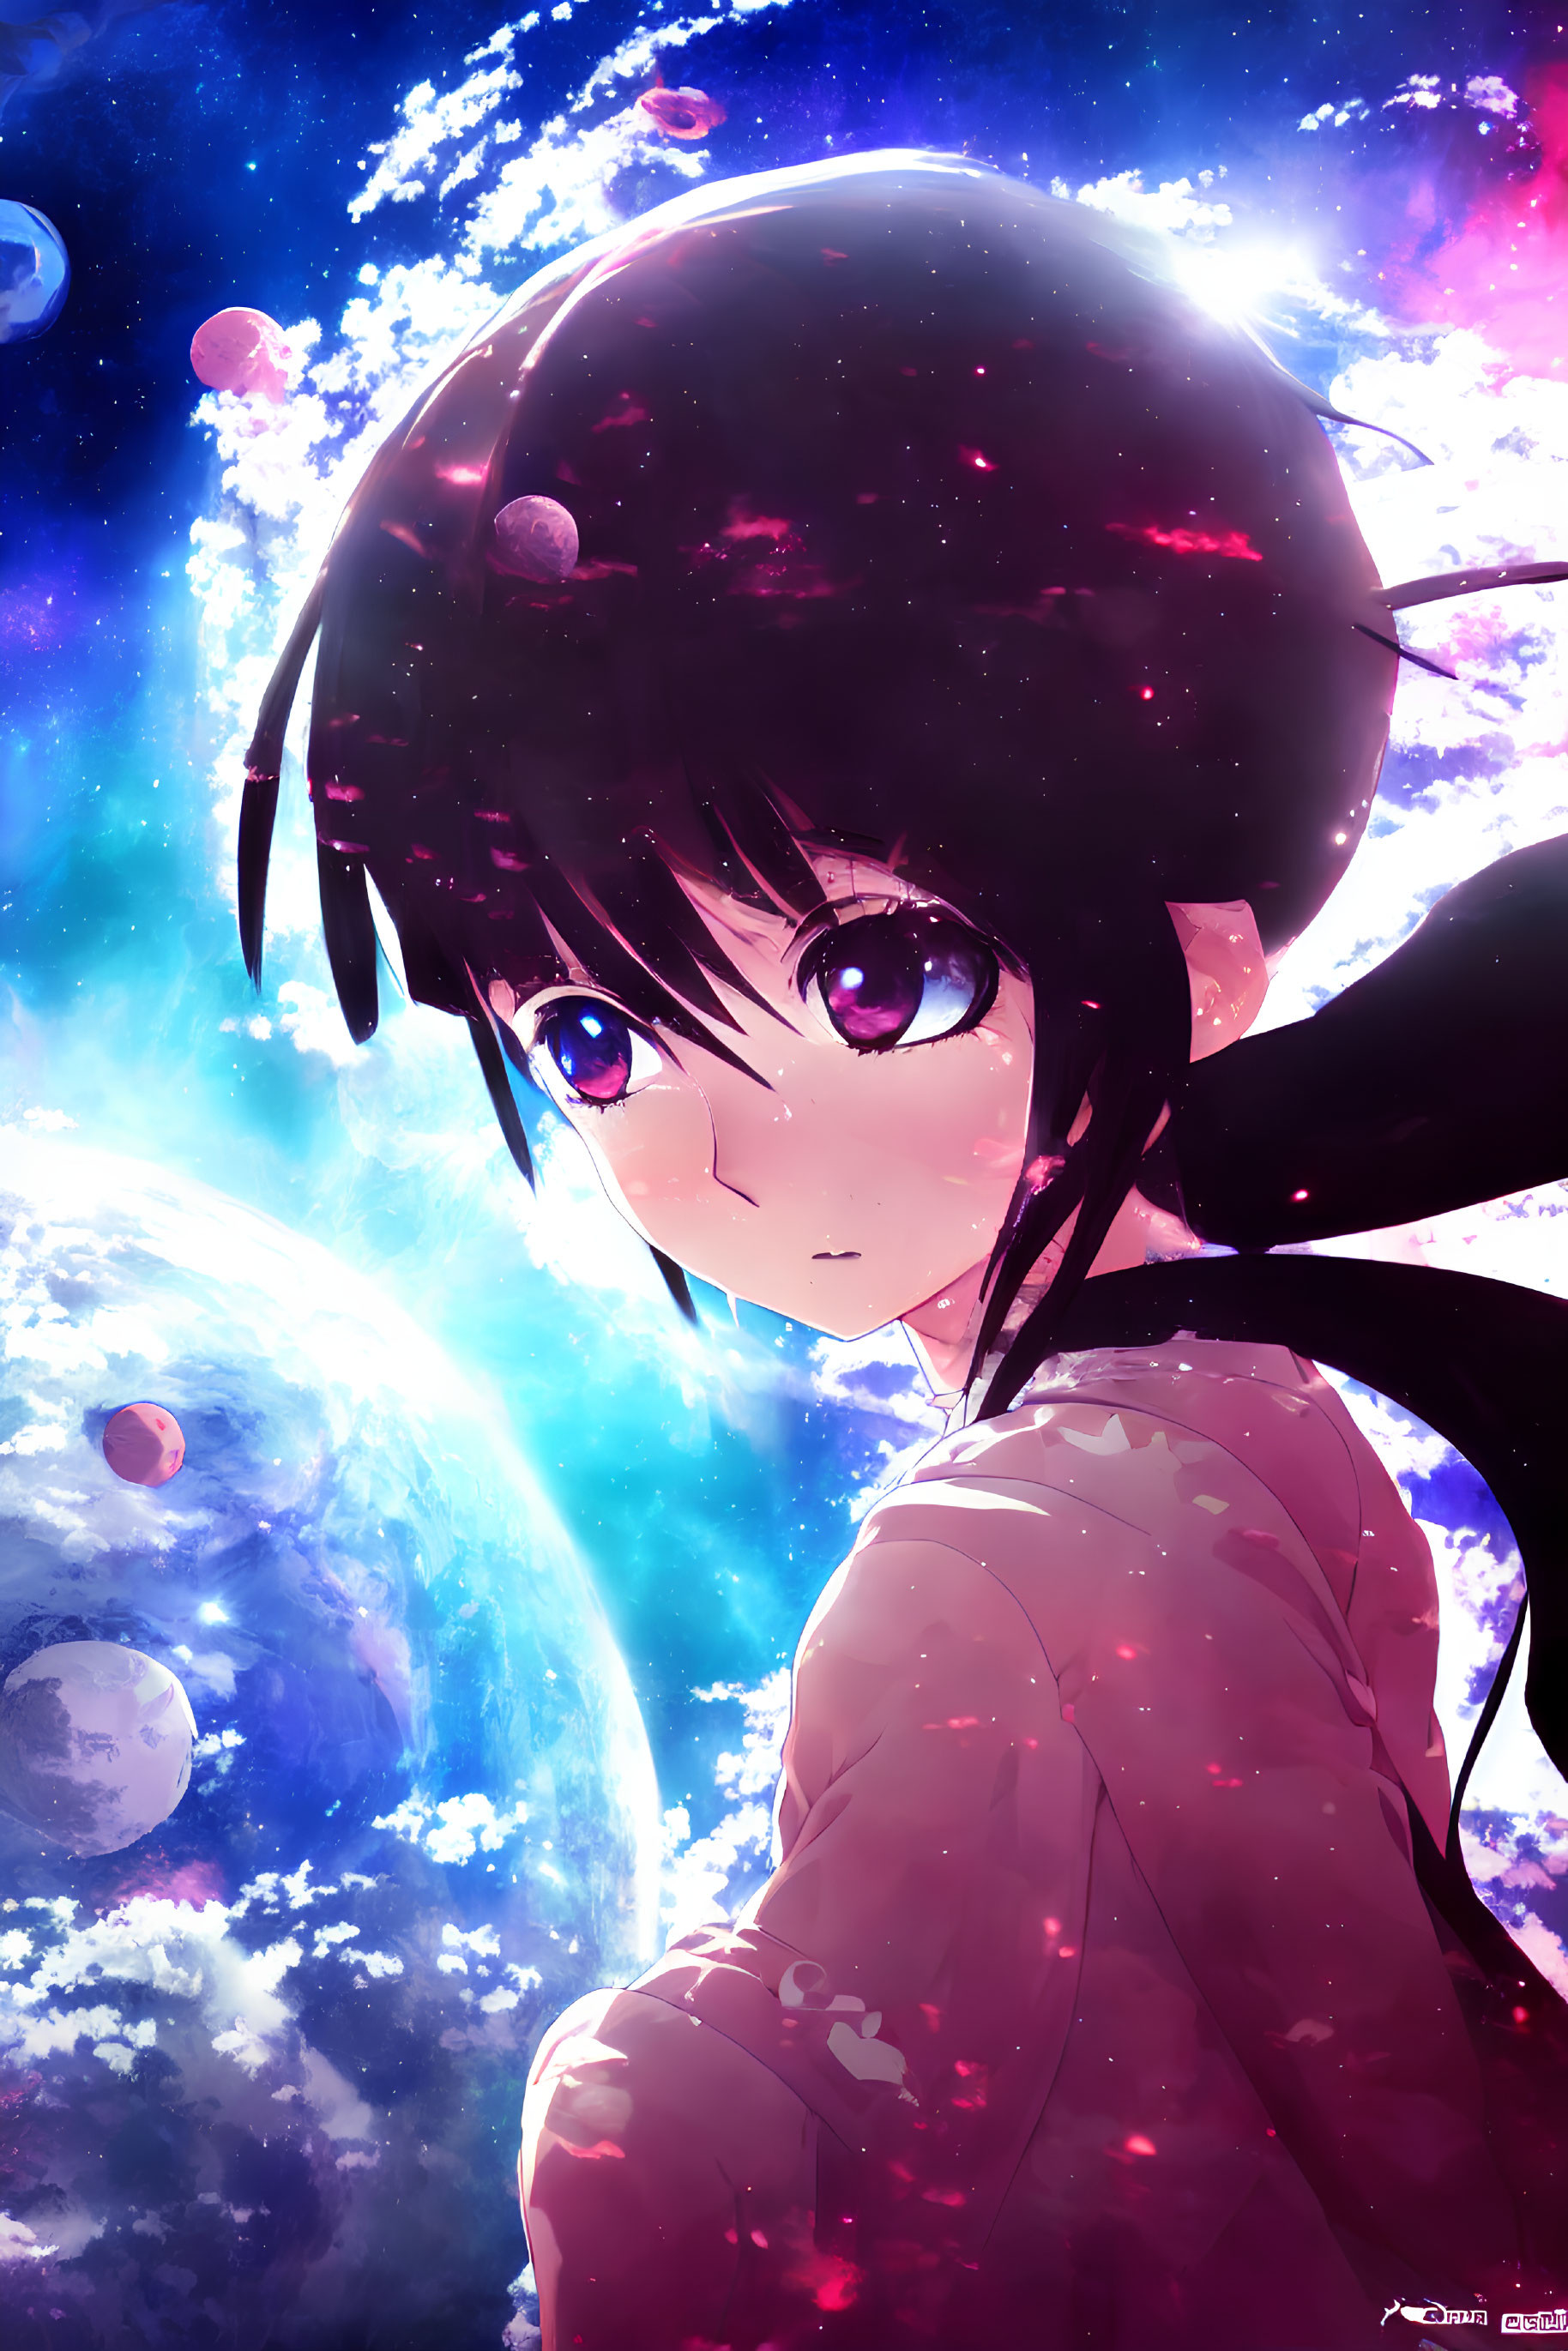 Anime-style girl with large eyes and long black hair against cosmic backdrop